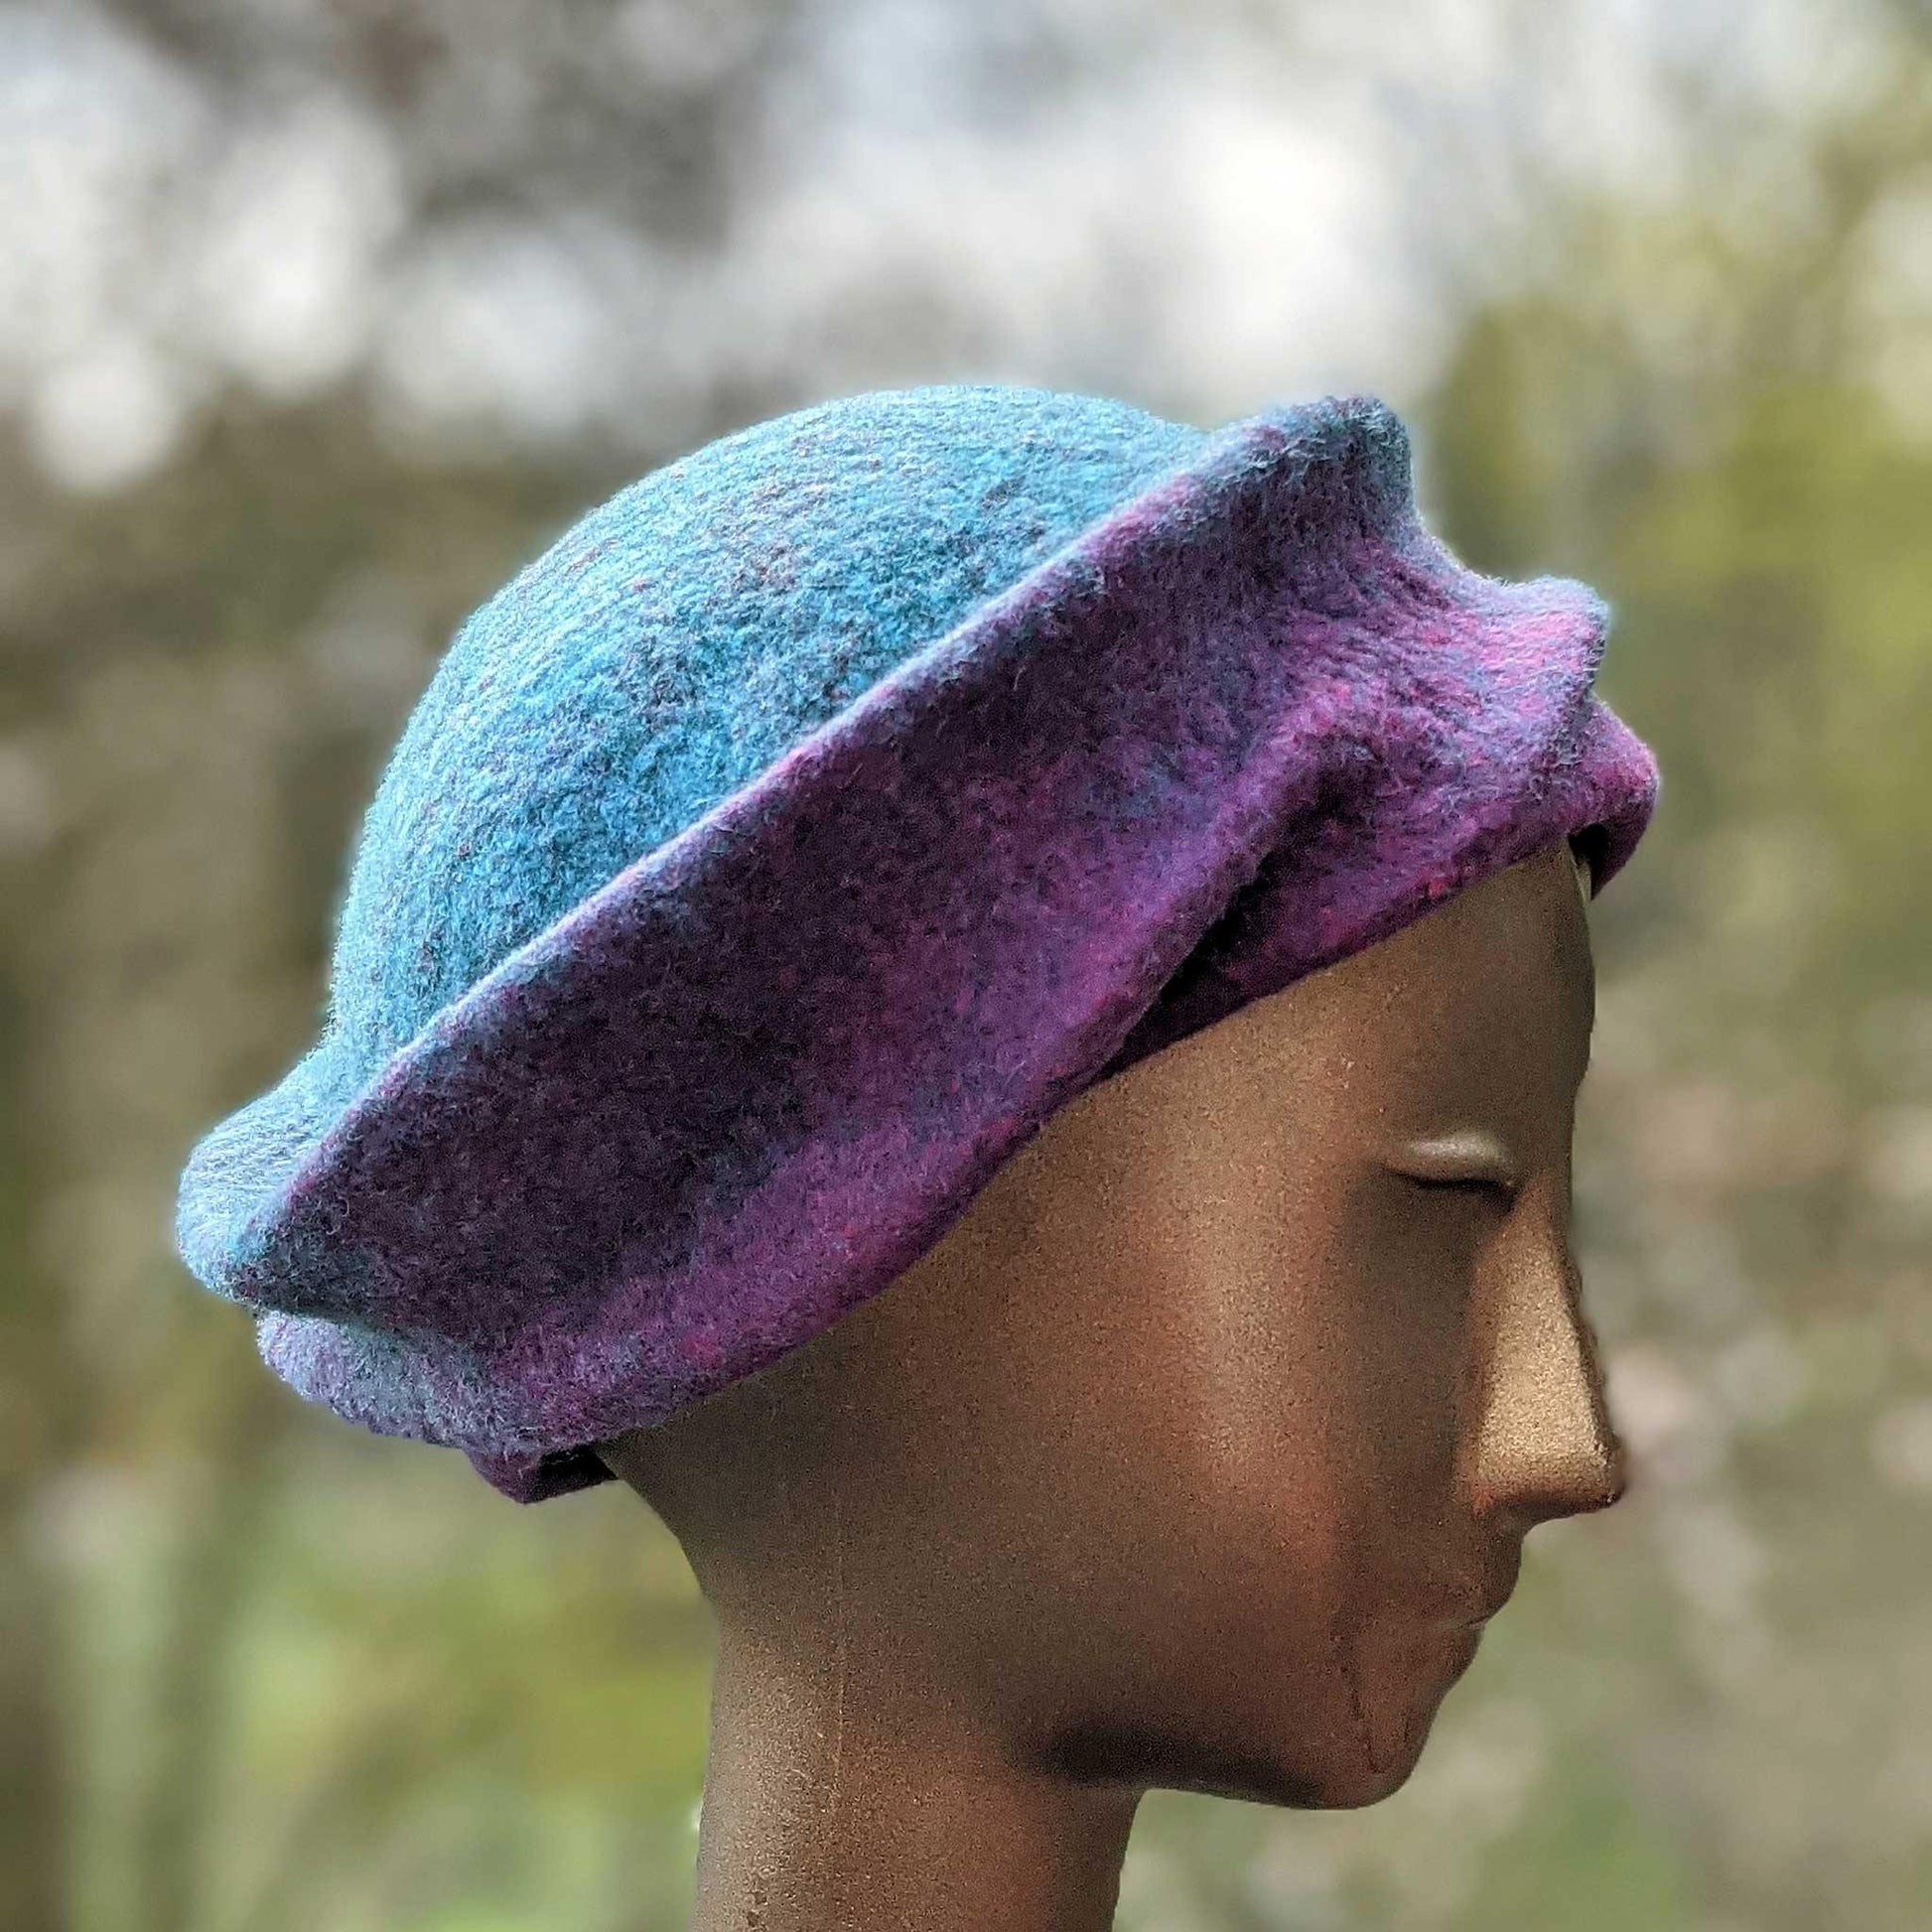 Undulating Spiral Hat in Blue-Green and Raspberry - side view